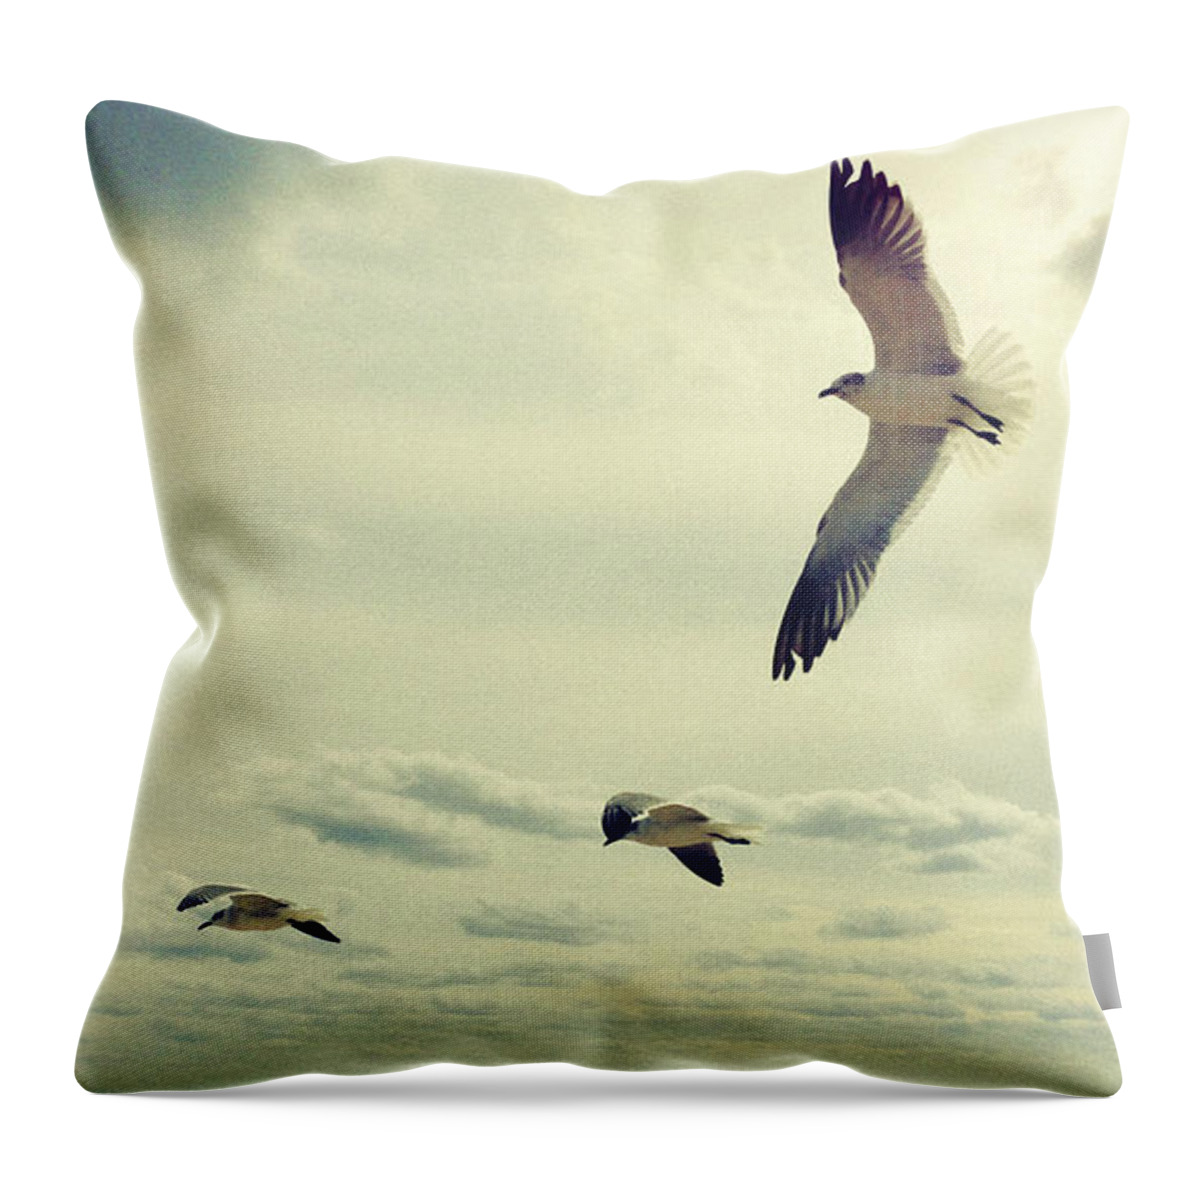 Fort Throw Pillow featuring the photograph Seagulls In Flight by Bradley R Youngberg